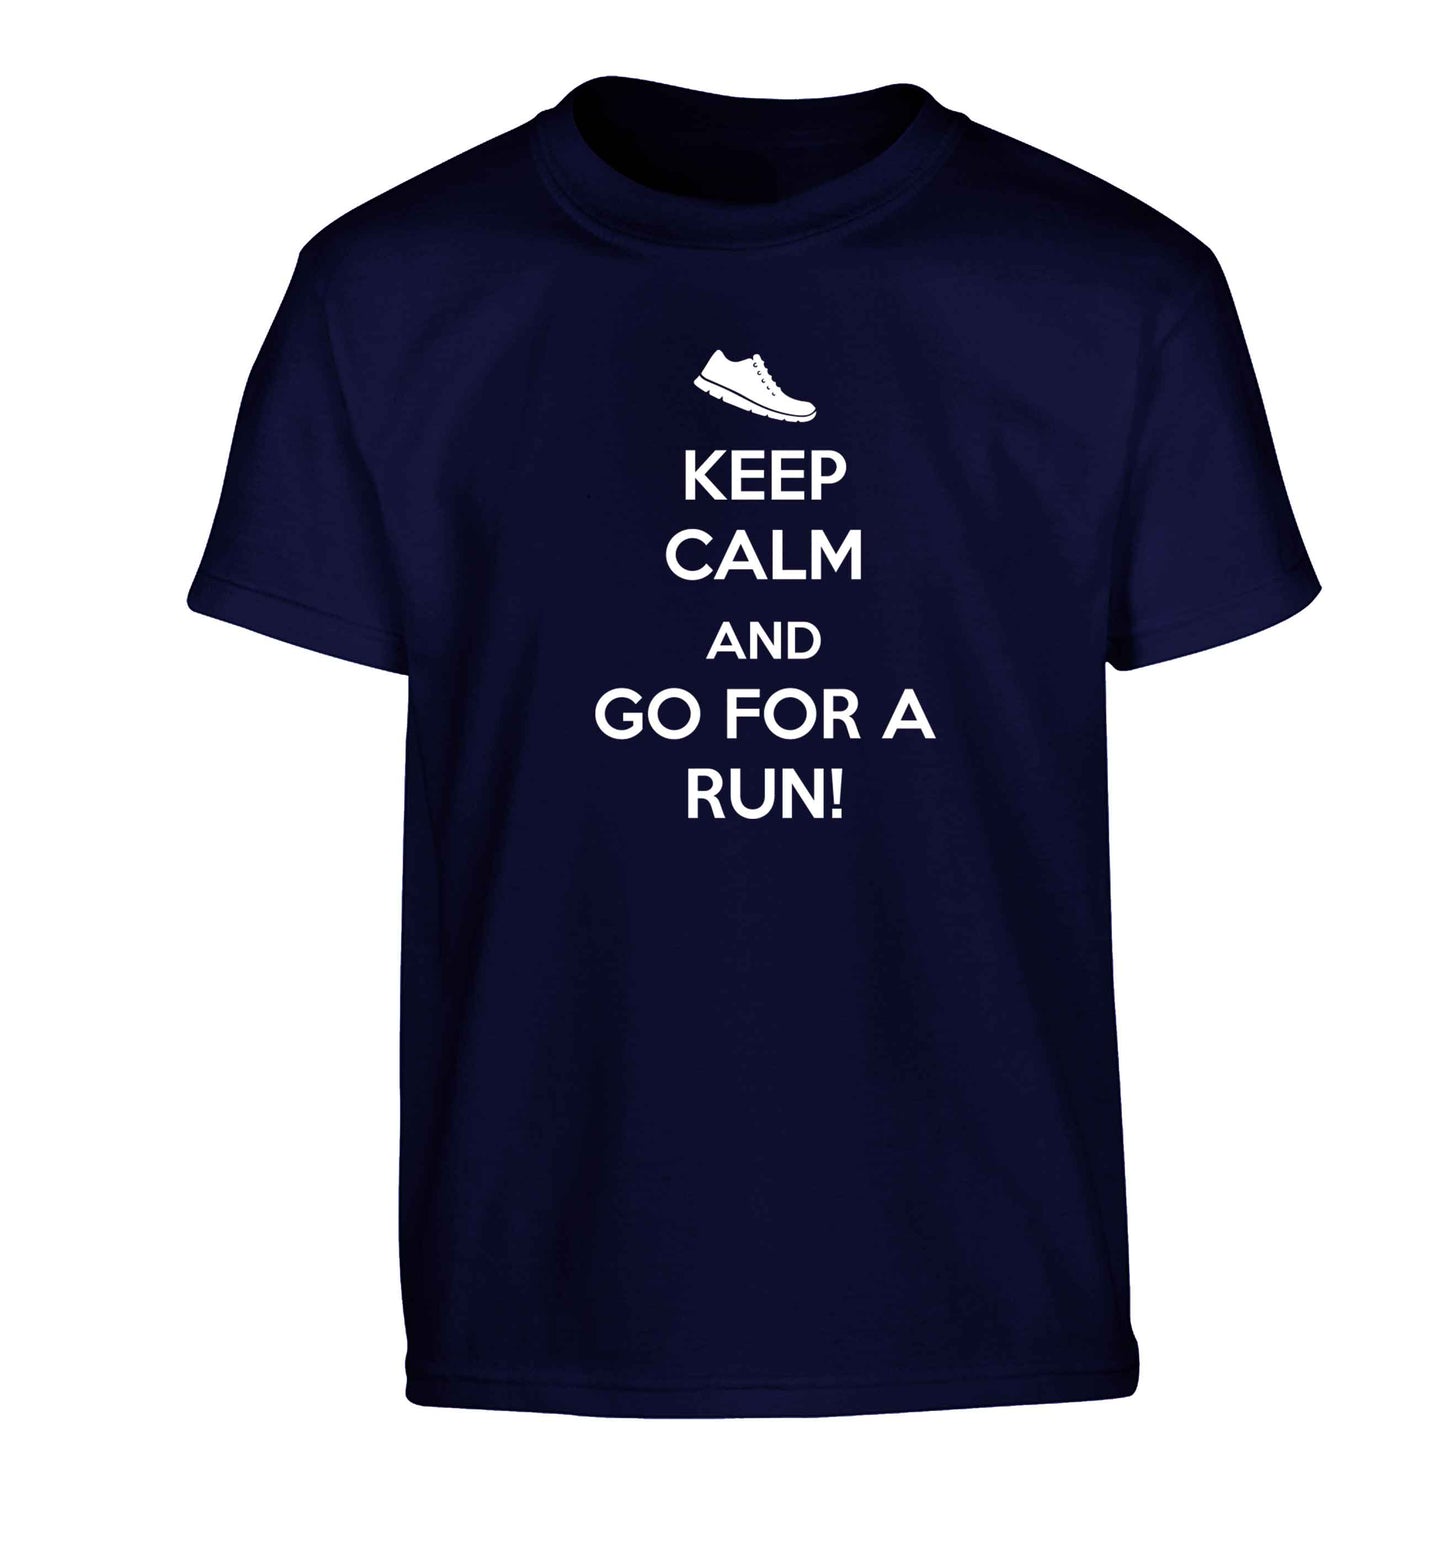 Keep calm and go for a run Children's navy Tshirt 12-13 Years